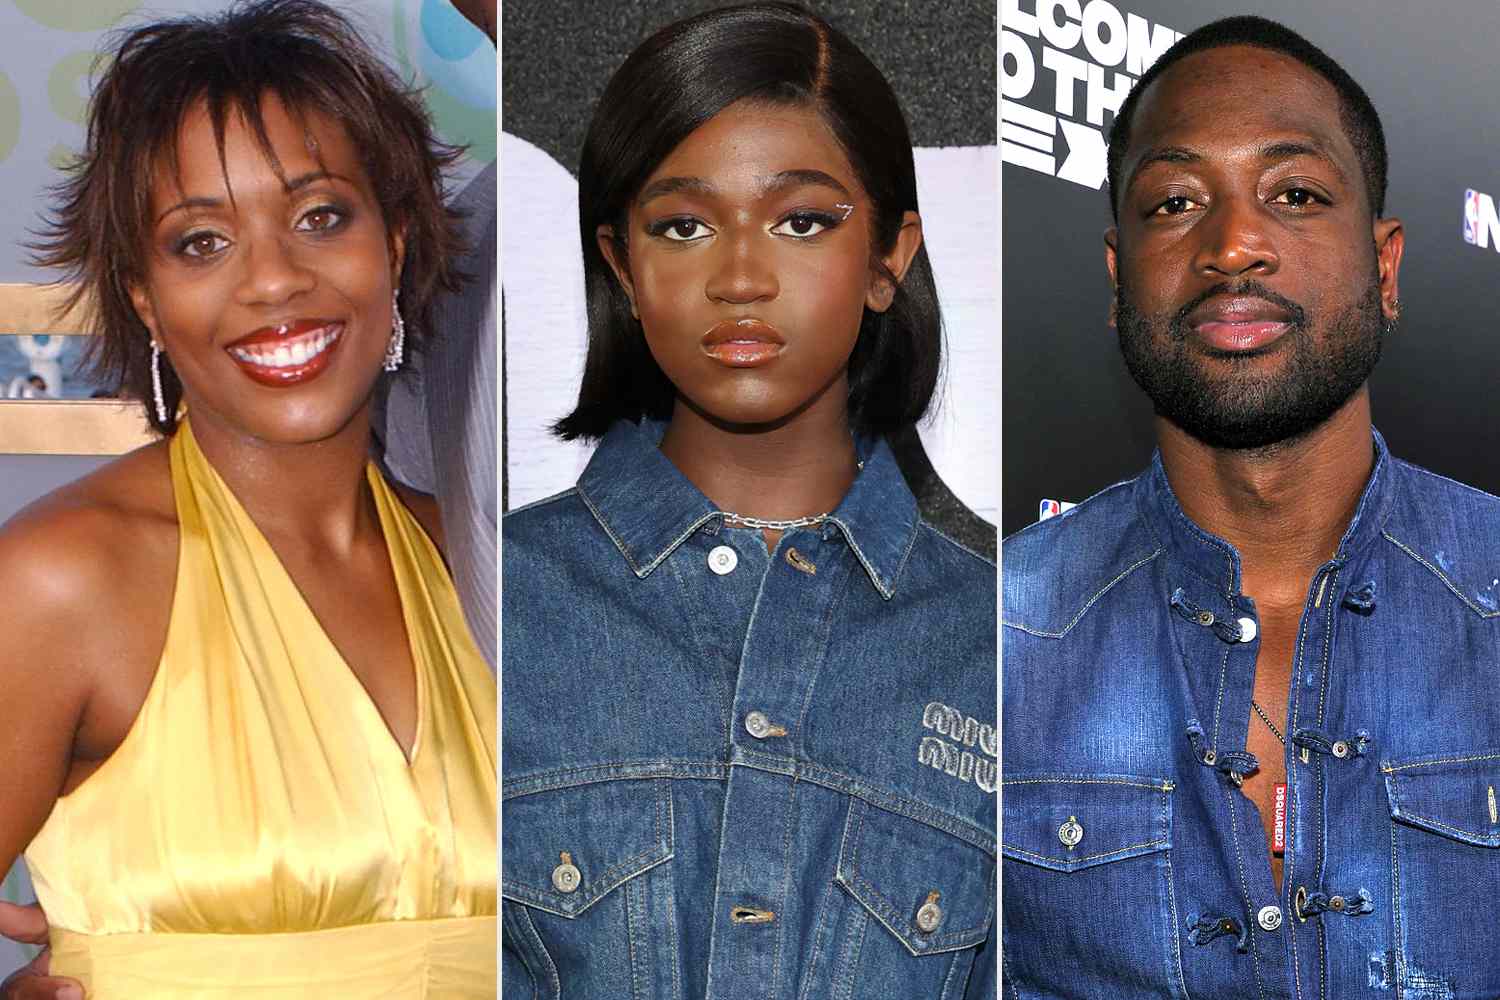 Dwyane-Wades-Ex-Wife-Objects-to-Legally-Change-Daughter-Zayas-Name-110222-737291a622504d20bc75cb2830e85eb7